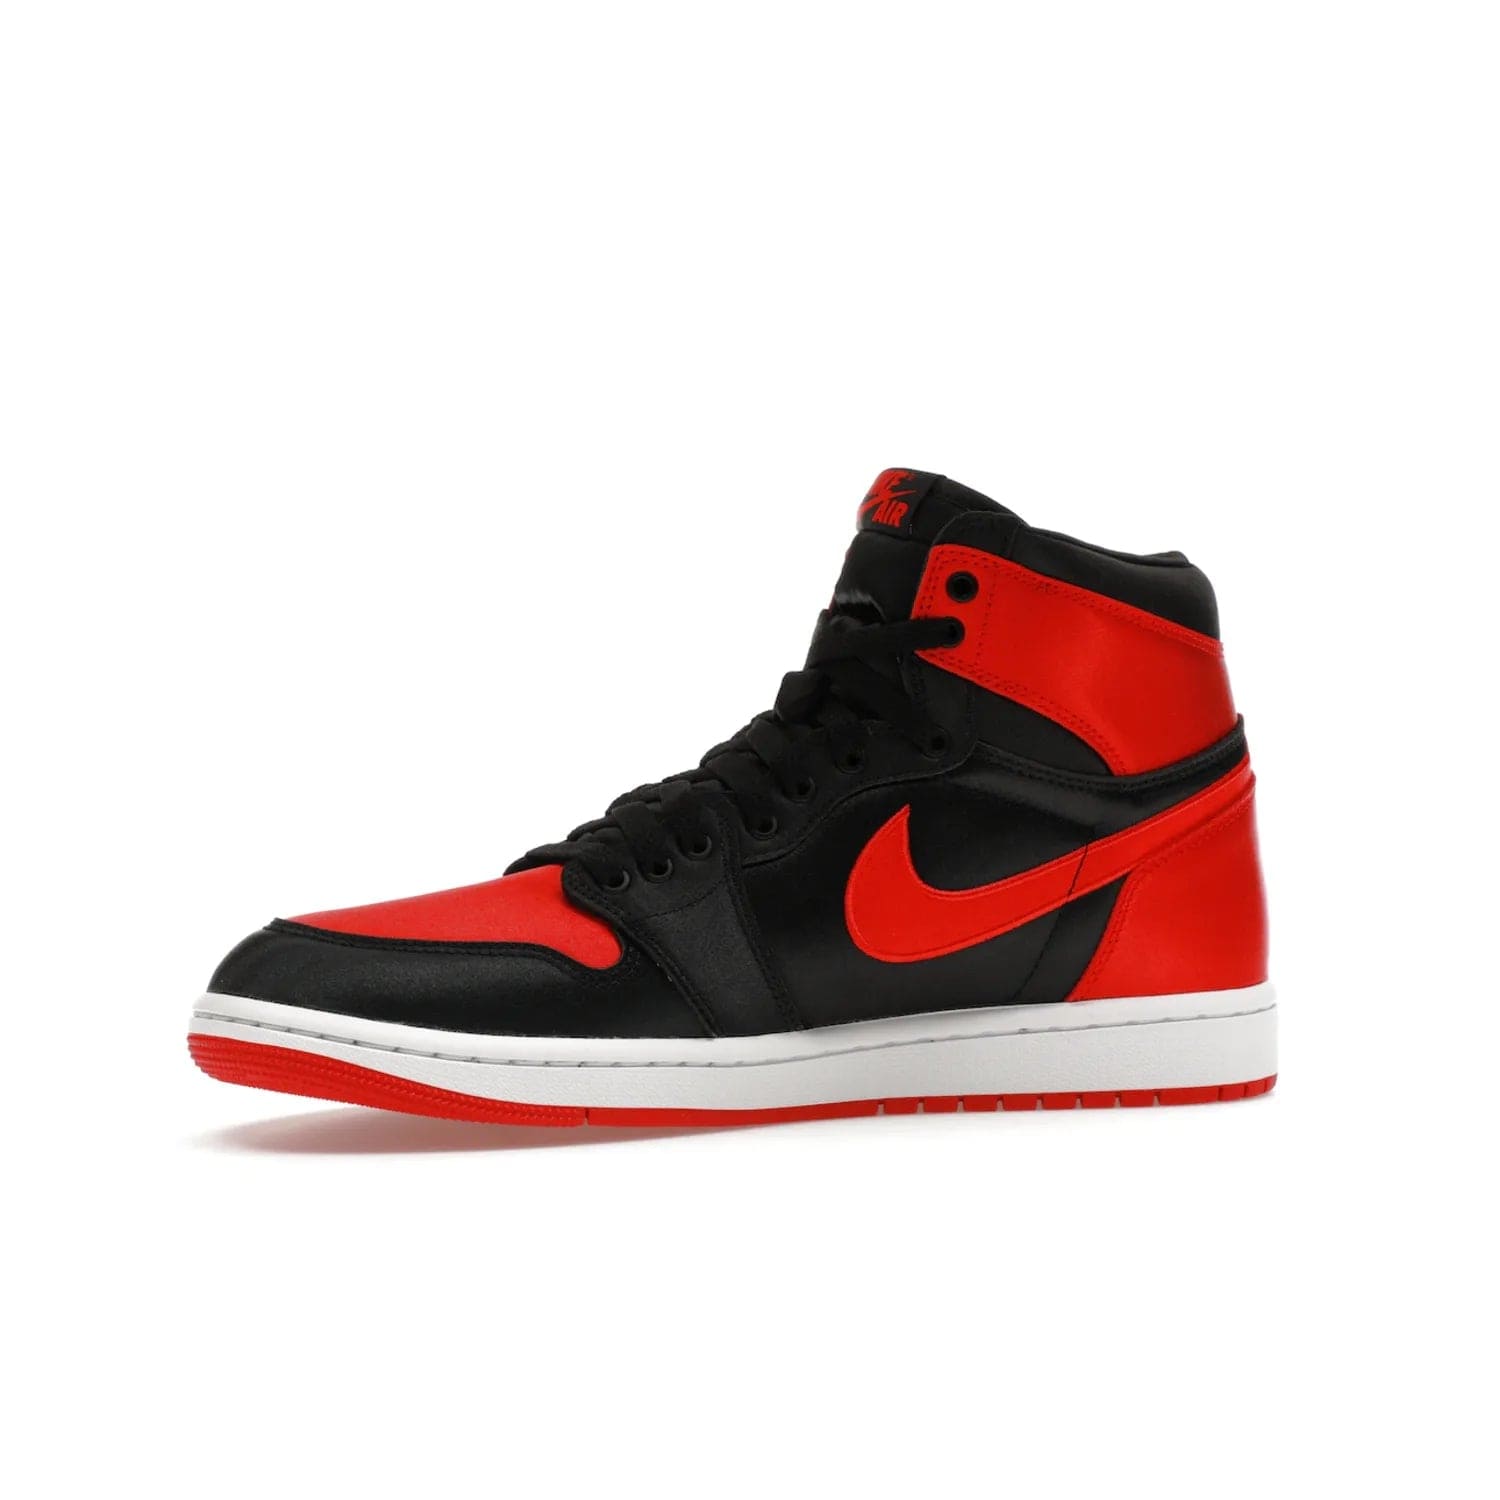 Jordan 1 Retro High OG Satin Bred (Women's) - Image 17 - Only at www.BallersClubKickz.com - Introducing the Jordan 1 Retro High OG Satin Bred (Women's). Luxe satin finish, contrasting hues & classic accents. Trending sneakers symbolizing timelessness & heritage. Make a bold statement with this iconic shoe. Available October 4, 2023.